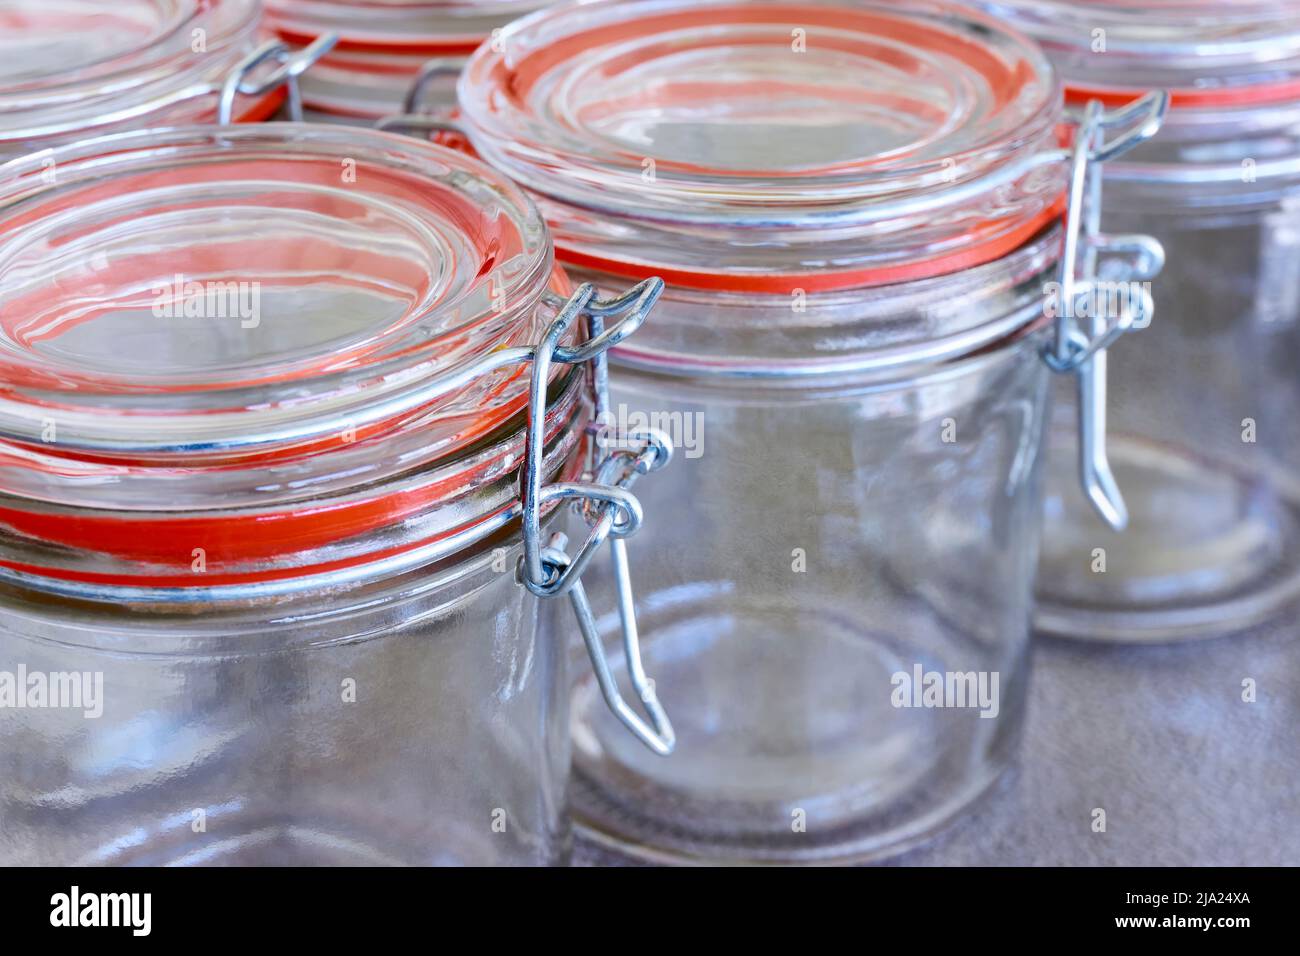 Closeup of empty glass canning jars or preserving containers with orange sealing ring in a row. Preserving food concept. Stock Photo